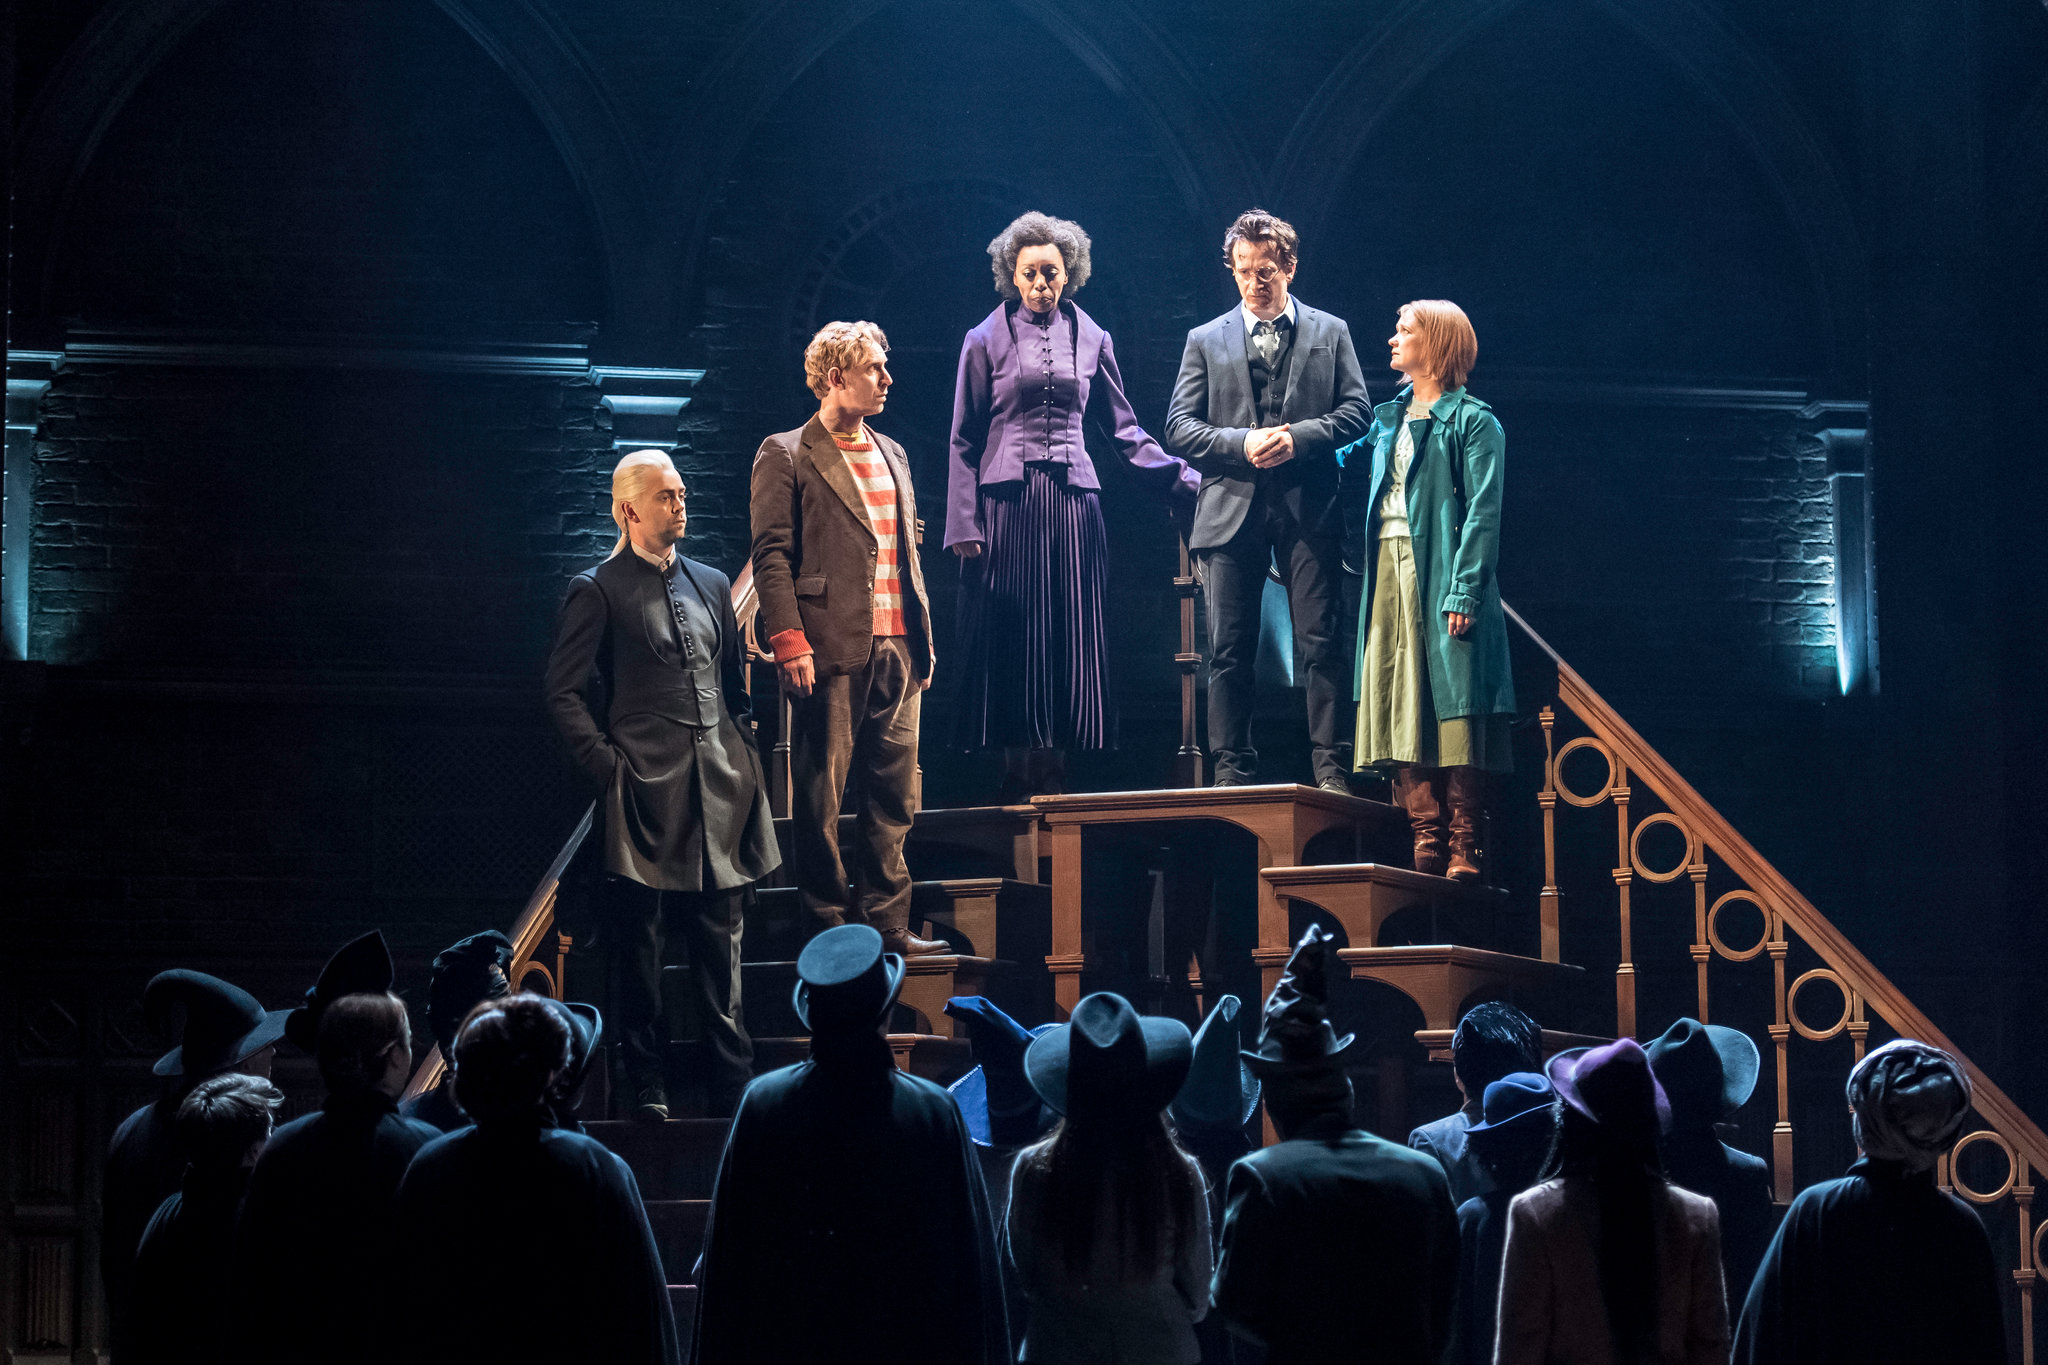 Harry Potter and The Cursed Child - Part 1 & 2 (11/12 7:30PM & 11/13 7:30PM) at Lyric Theatre